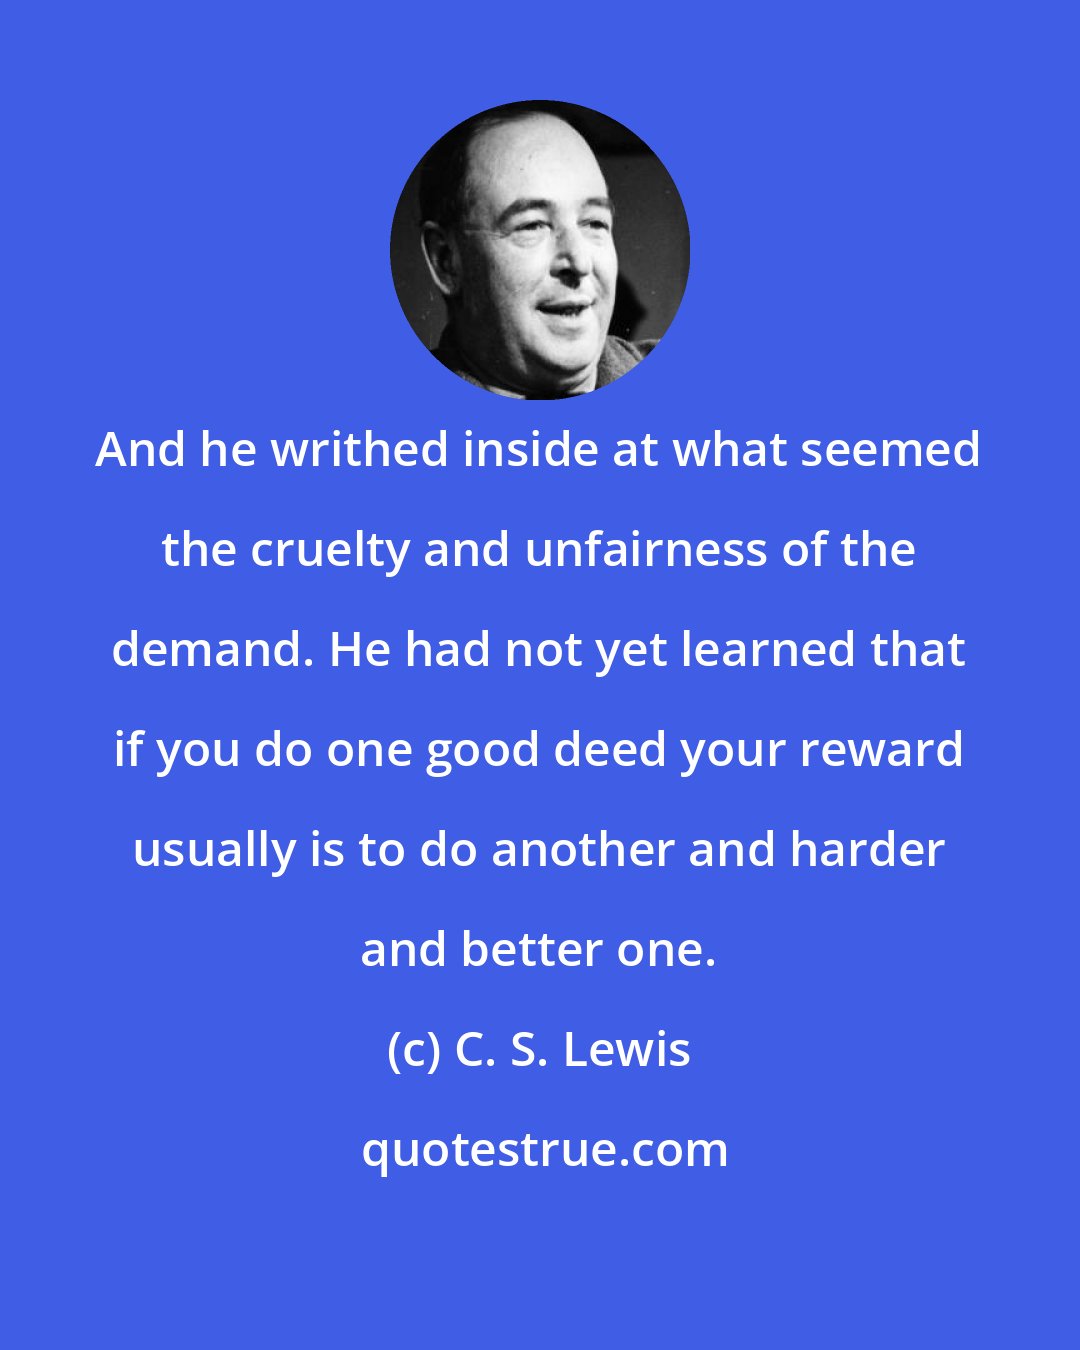 C. S. Lewis: And he writhed inside at what seemed the cruelty and unfairness of the demand. He had not yet learned that if you do one good deed your reward usually is to do another and harder and better one.